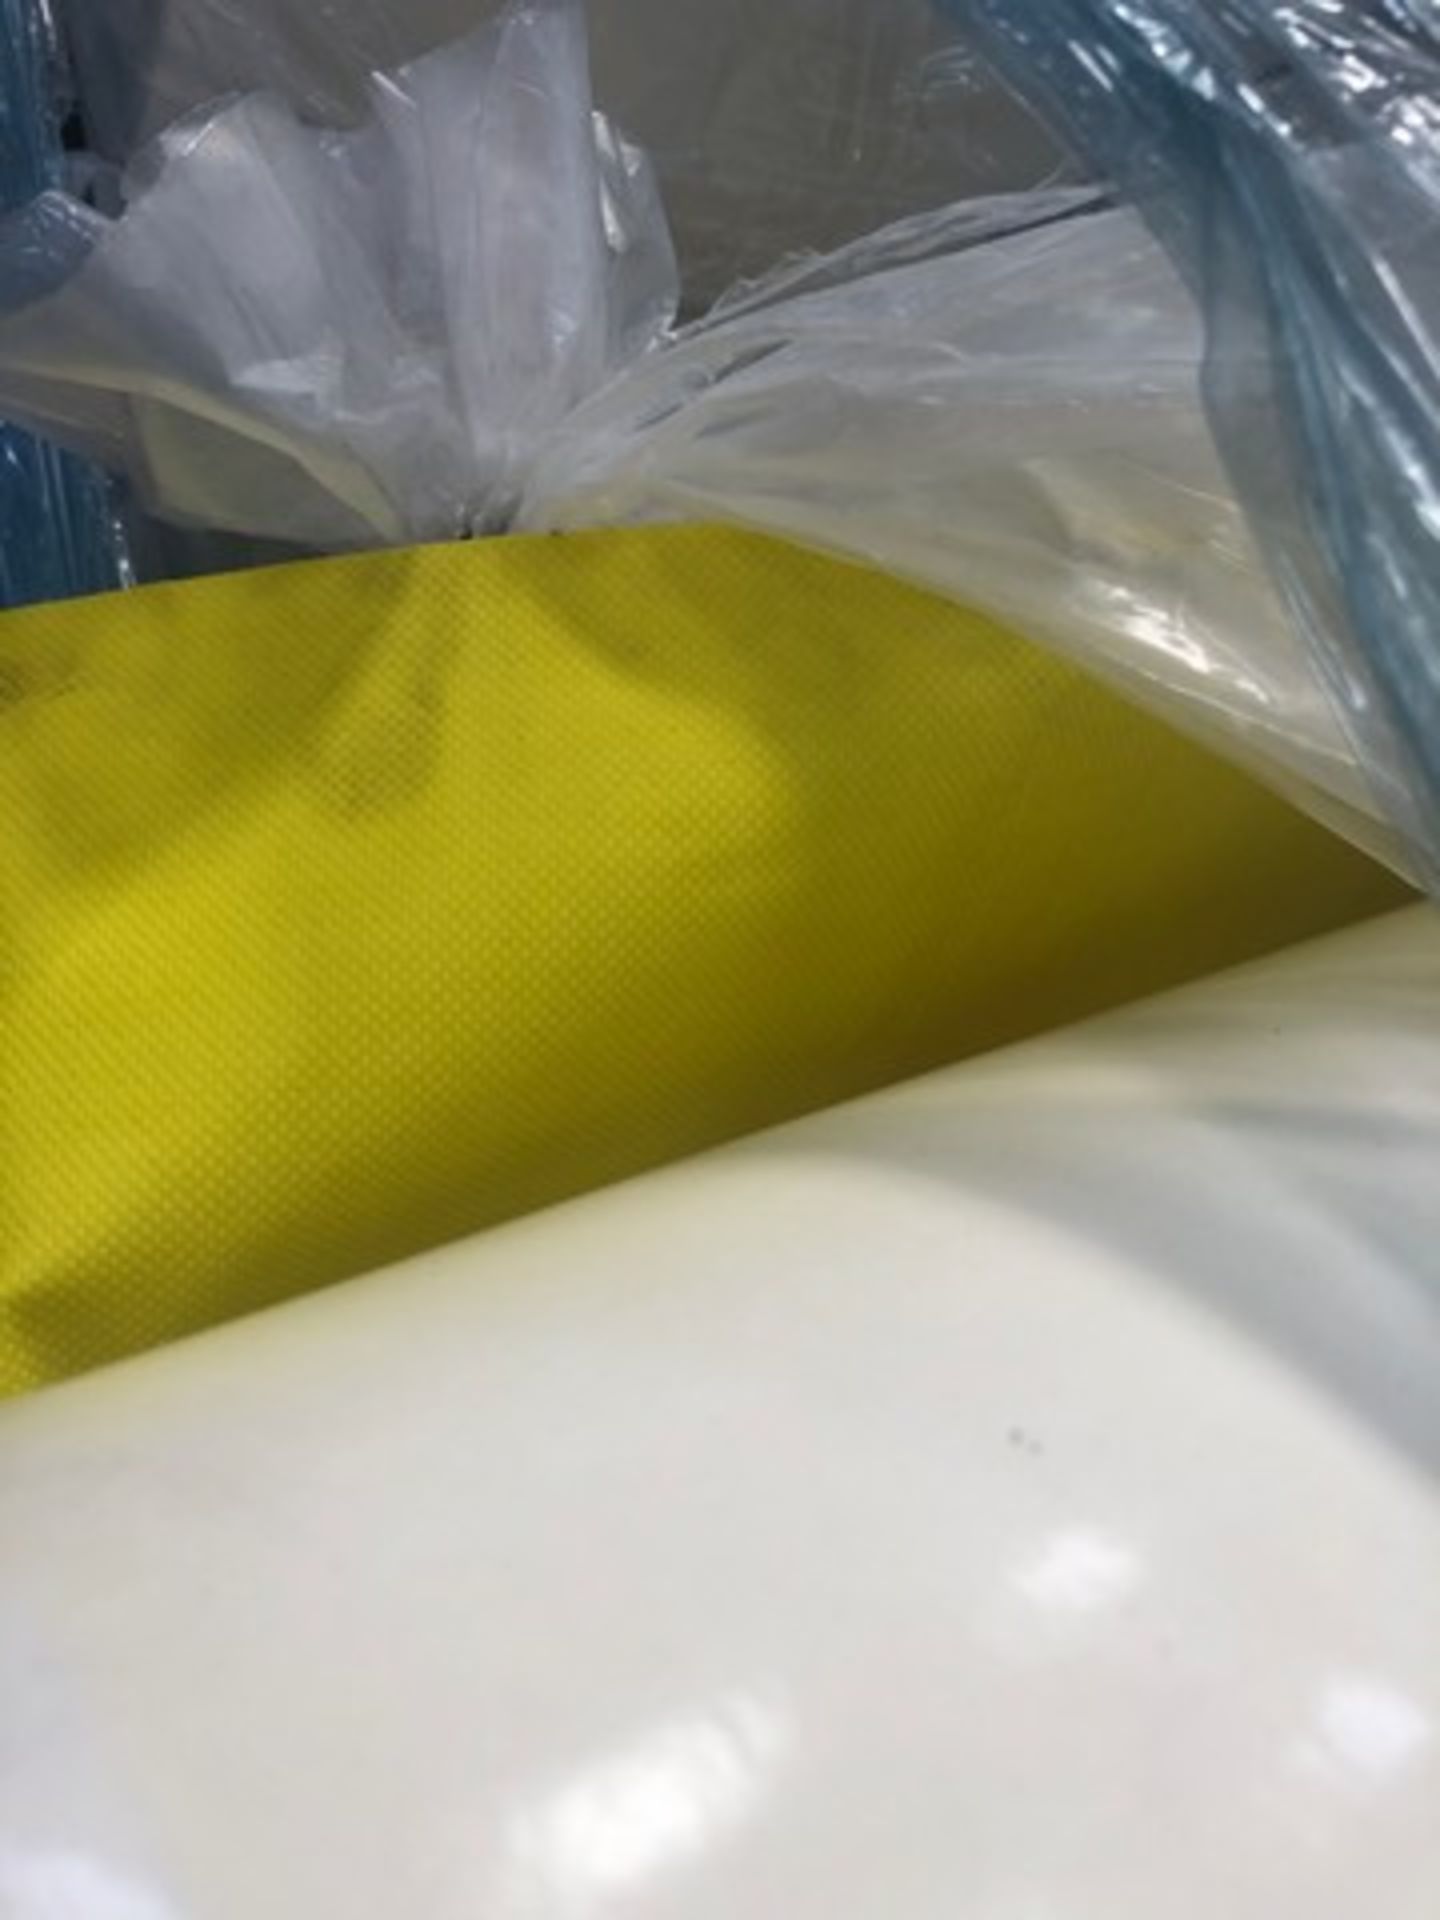 Florprotec duramat floorcovering (yellow) approx 25 rolls - Image 2 of 3